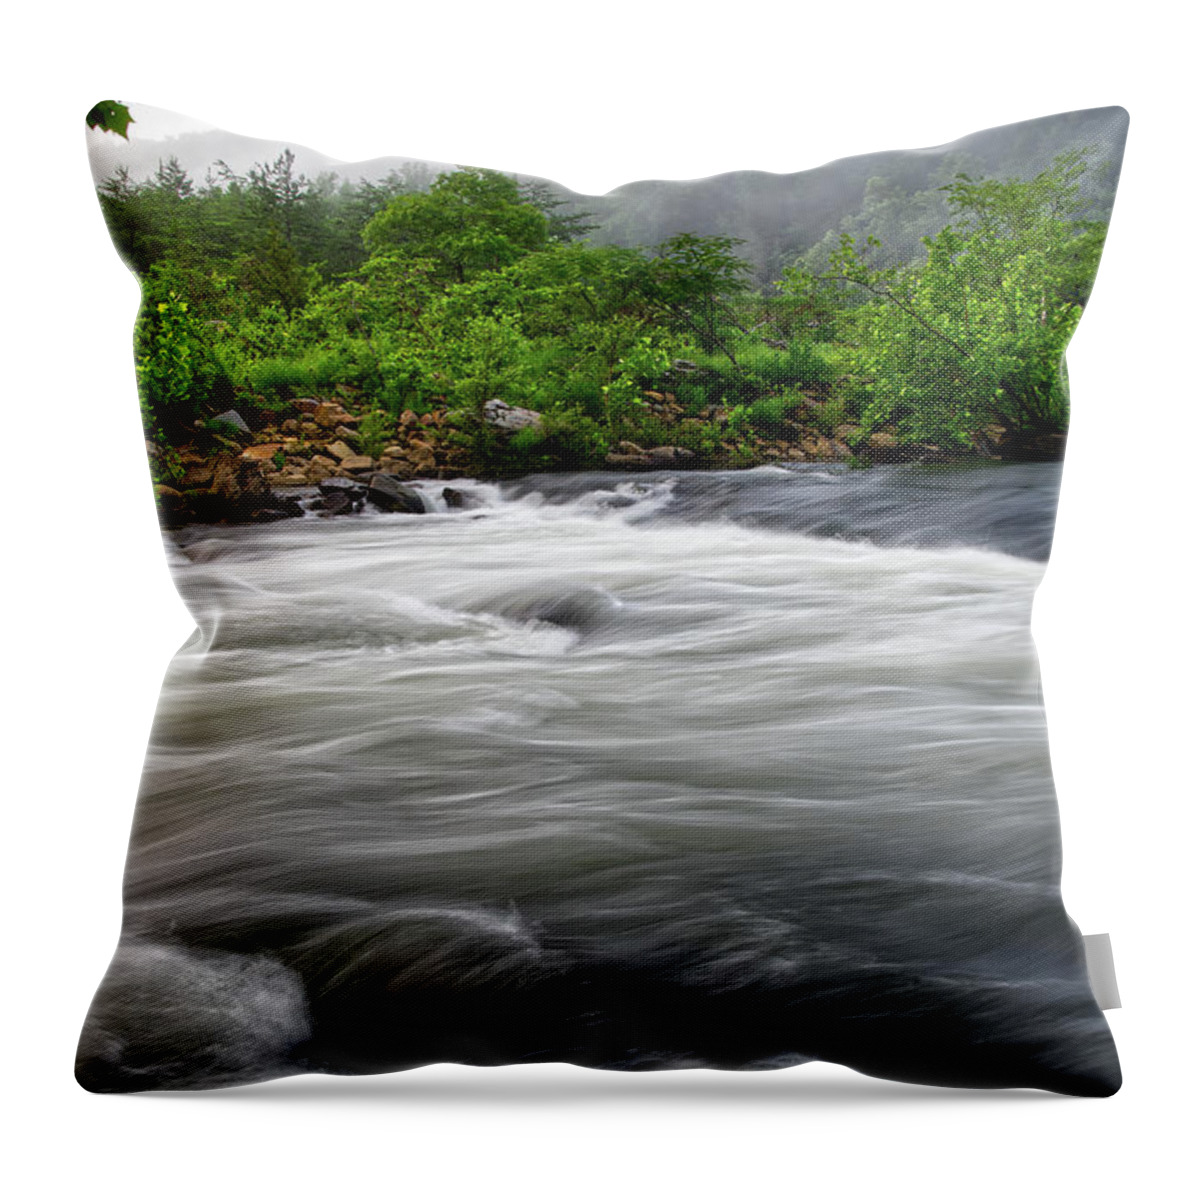 Nemo Rapids Throw Pillow featuring the photograph Nemo Rapids 11 by Phil Perkins